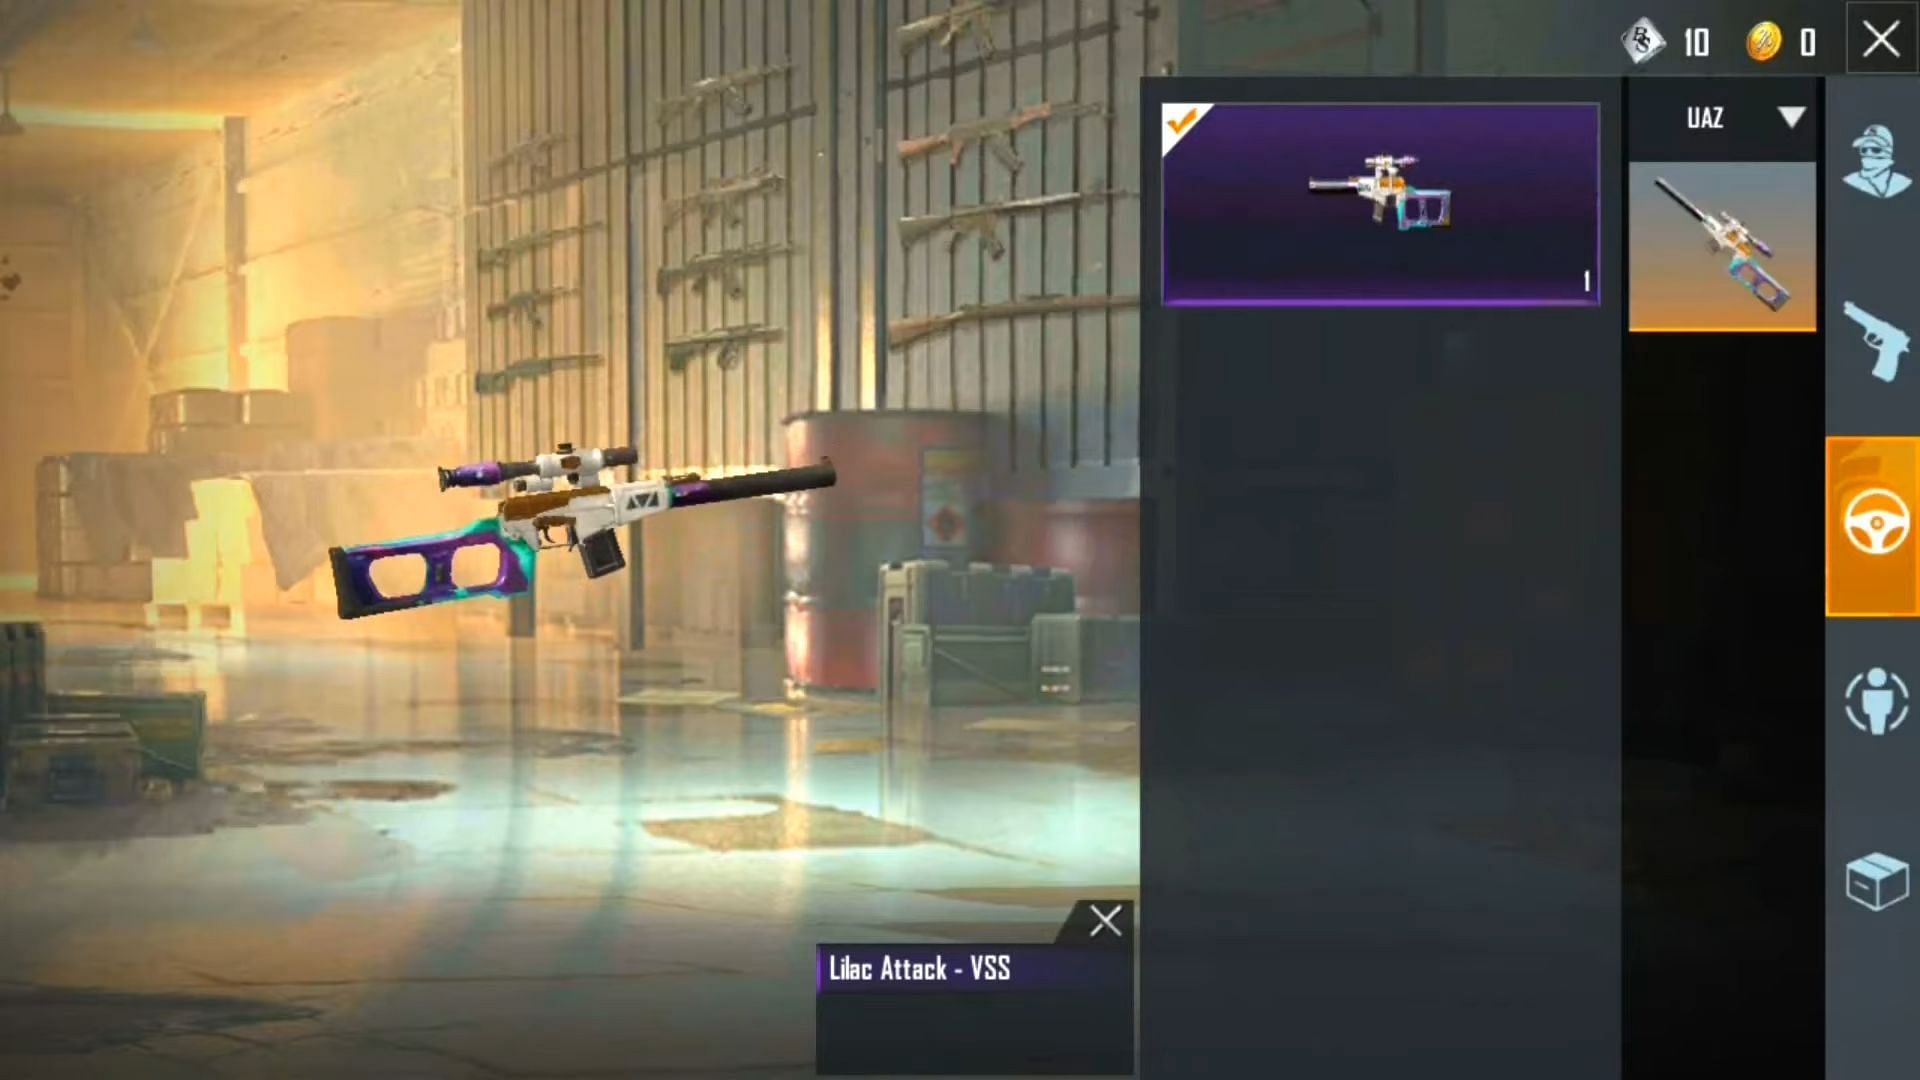 Lilac Attack - VSS (Image via Great Army YT / YouTube)